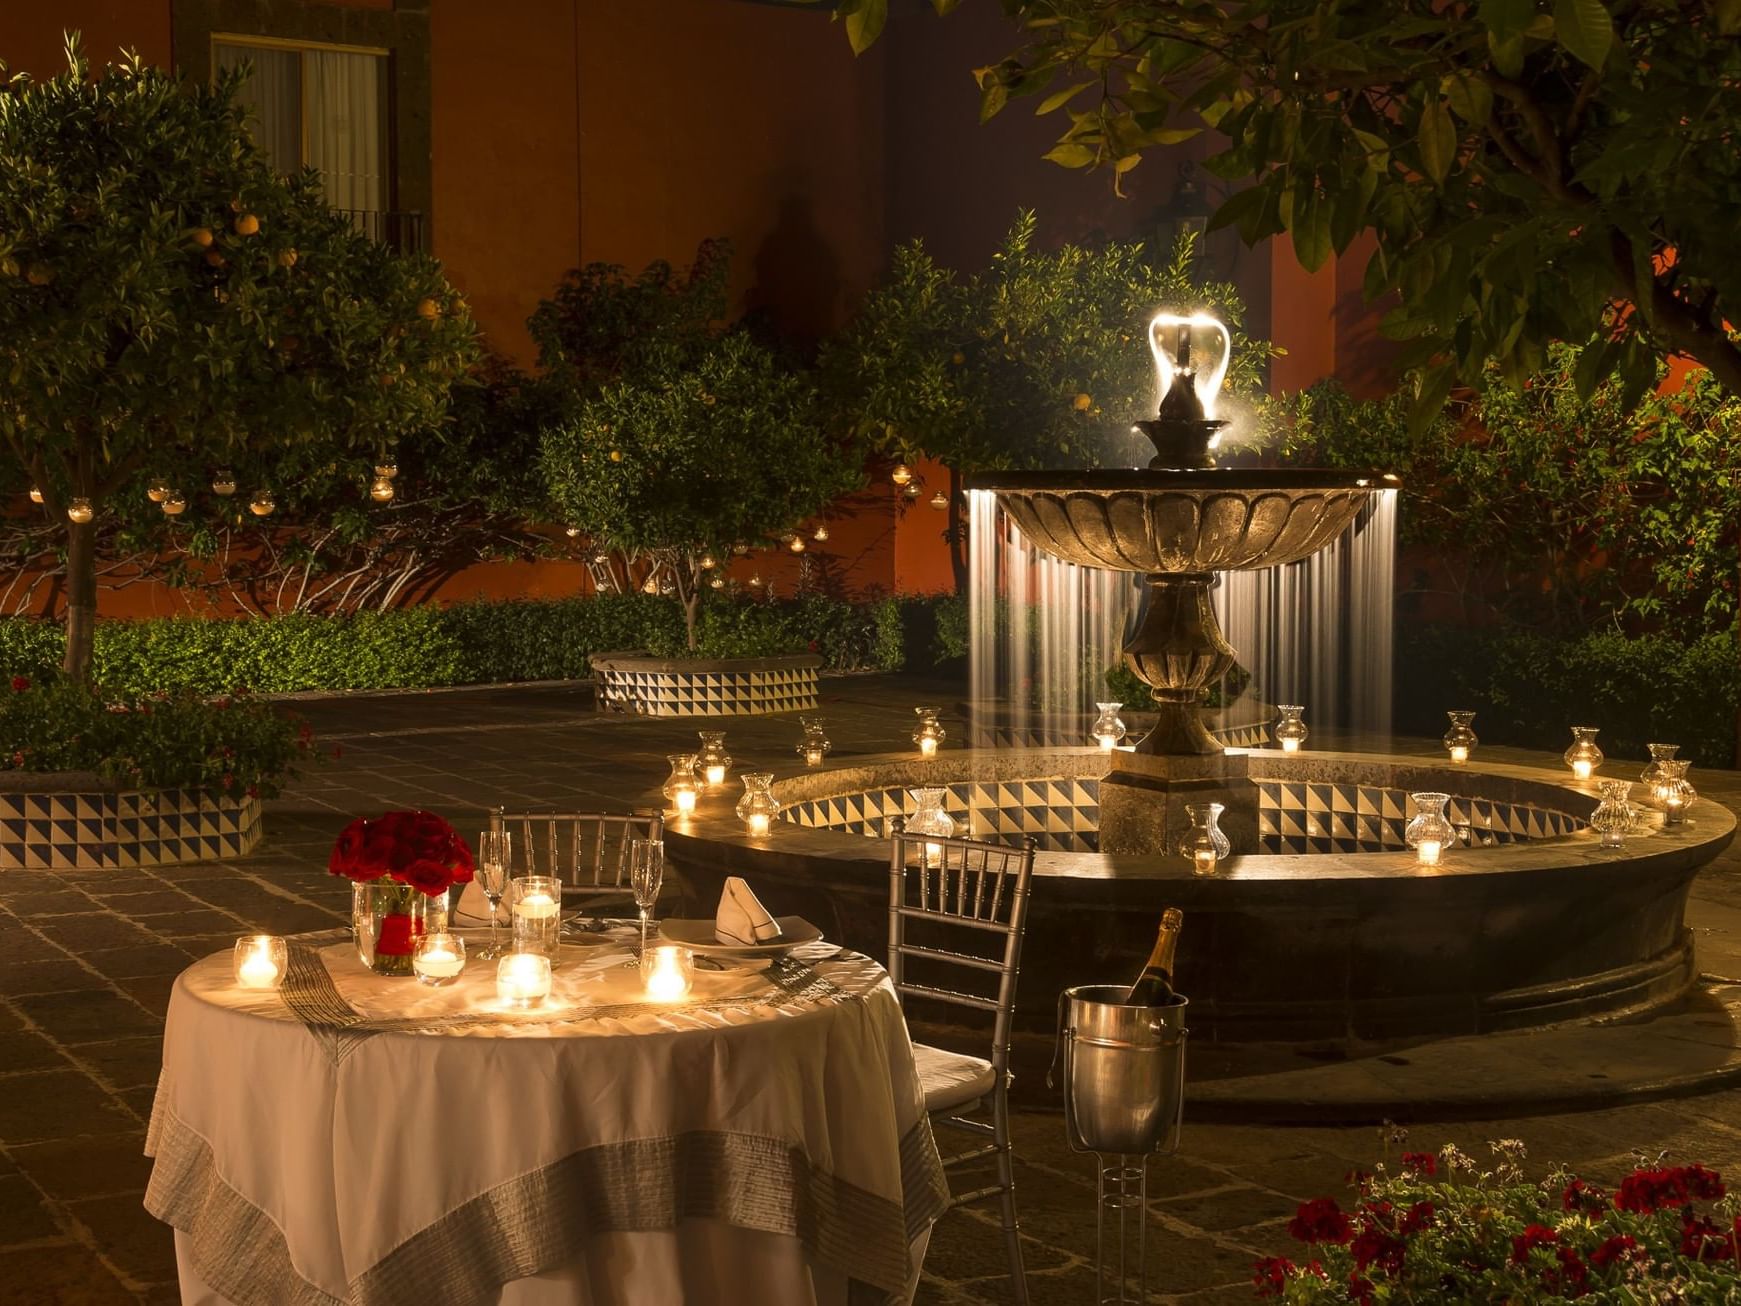 Romantic candlelight dinner in outdoors at La Colección Resort